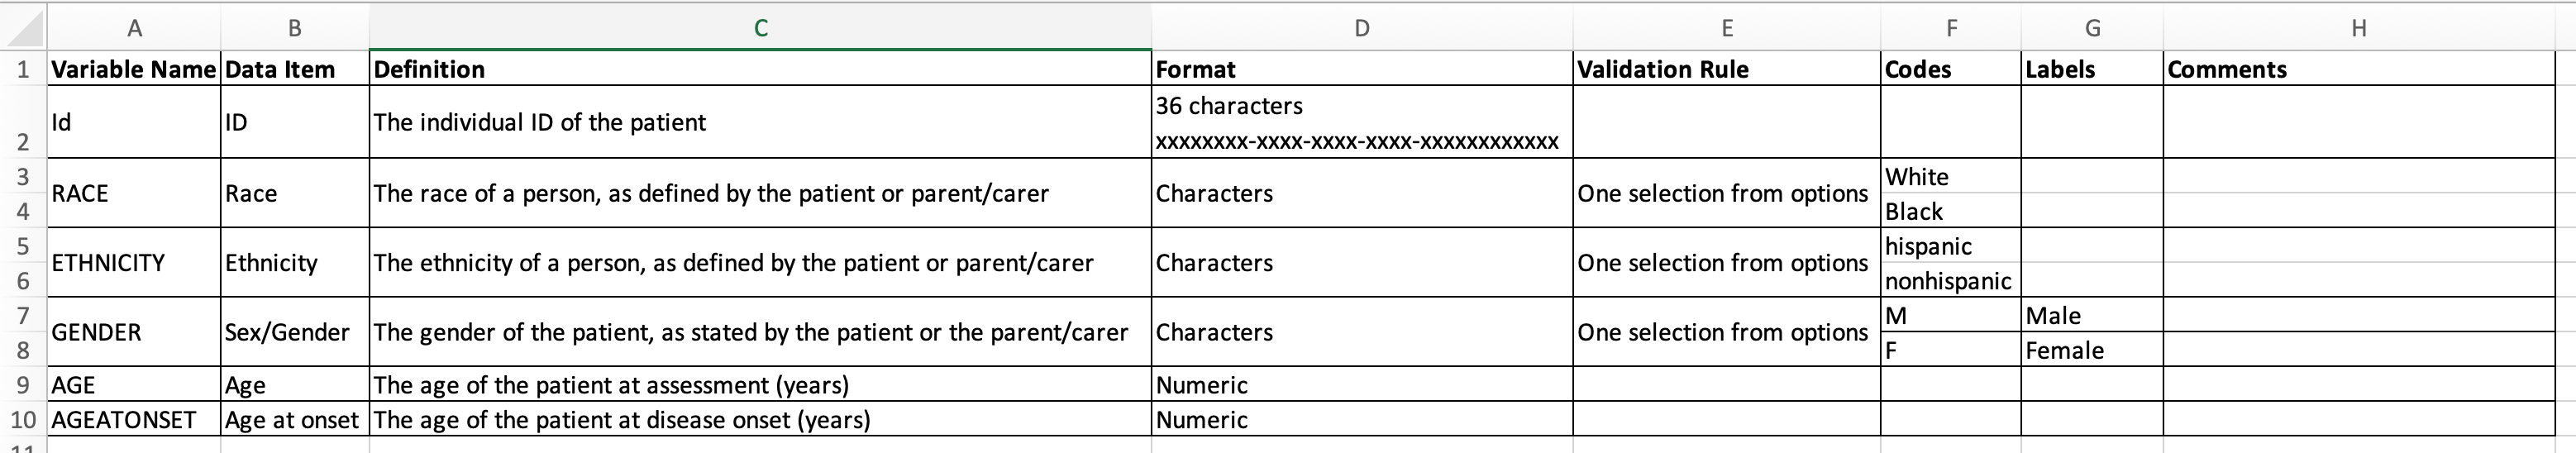 Image of a spreadsheet with the columns Variable Name, Data Item, Definition, Format, Validation Rule, Codes, Labels and Comments.  The spreadsheet gives examples of contents for each of these columns based on the previous image, for ID, race, ethnicity, gender, age and age at onset. 